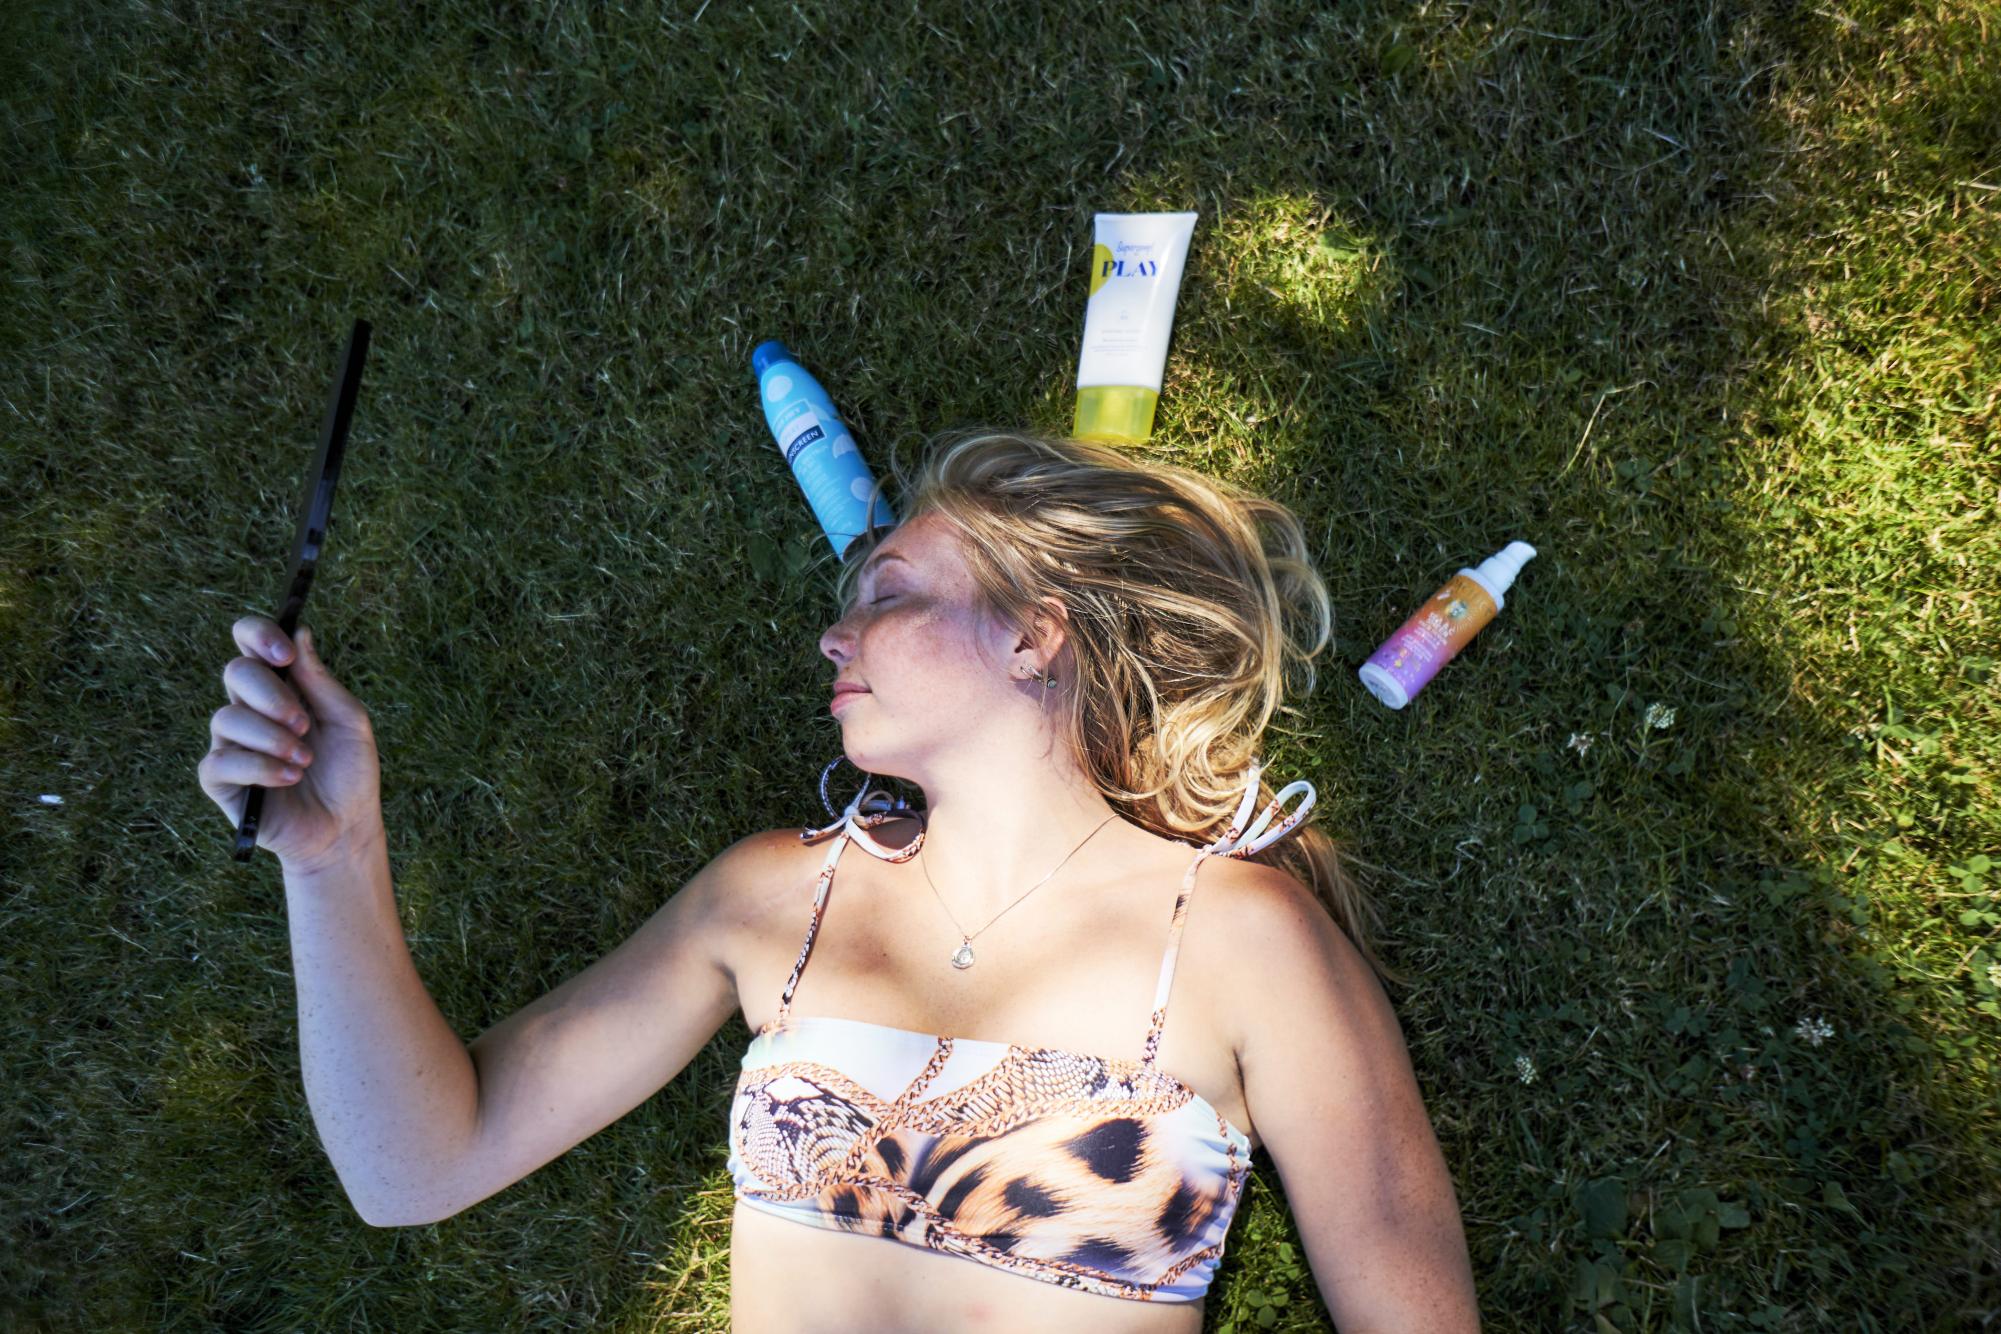 Anna Yeates (she/her) after applying dewy facial sunscreen on July 22, in Corvallis. Reapplying sunscreen is extremely important to fully protect your skin and it is recommended to reapply every two hours.